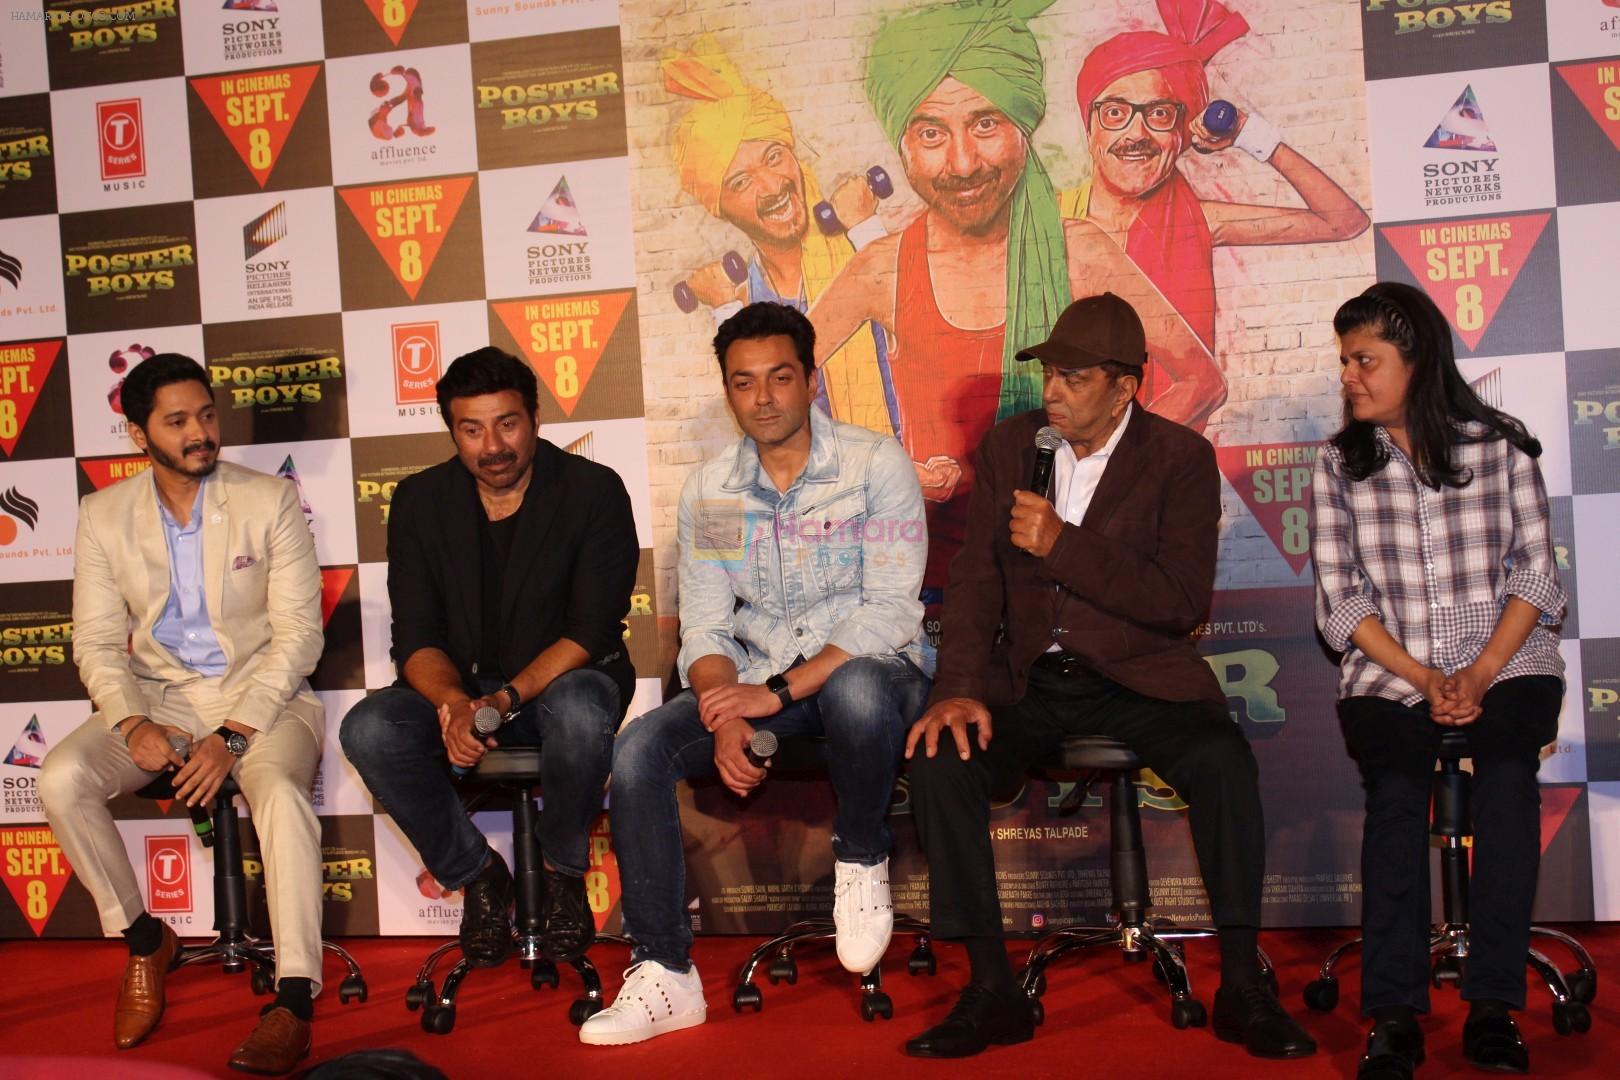 Dharmendra, Sunny Deol, Bobby Deol, Shreyas Talpade at the Trailer Launch Of Film Poster Boys on 24th July 2017